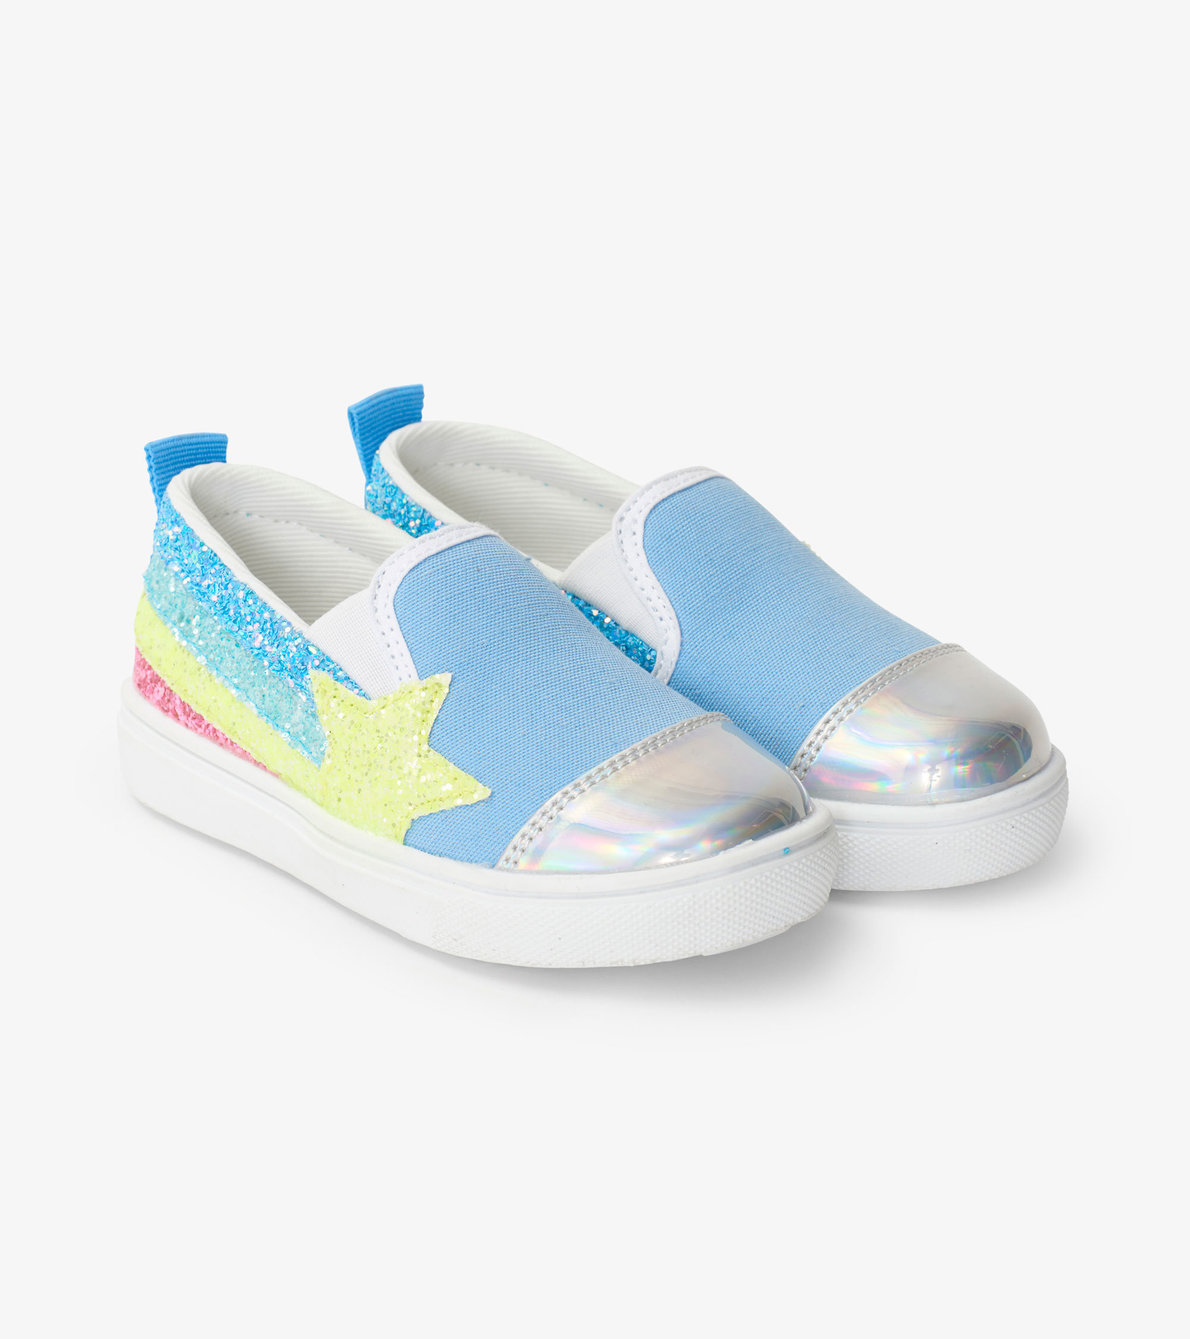 View larger image of Shooting Star Slip On Sneaker